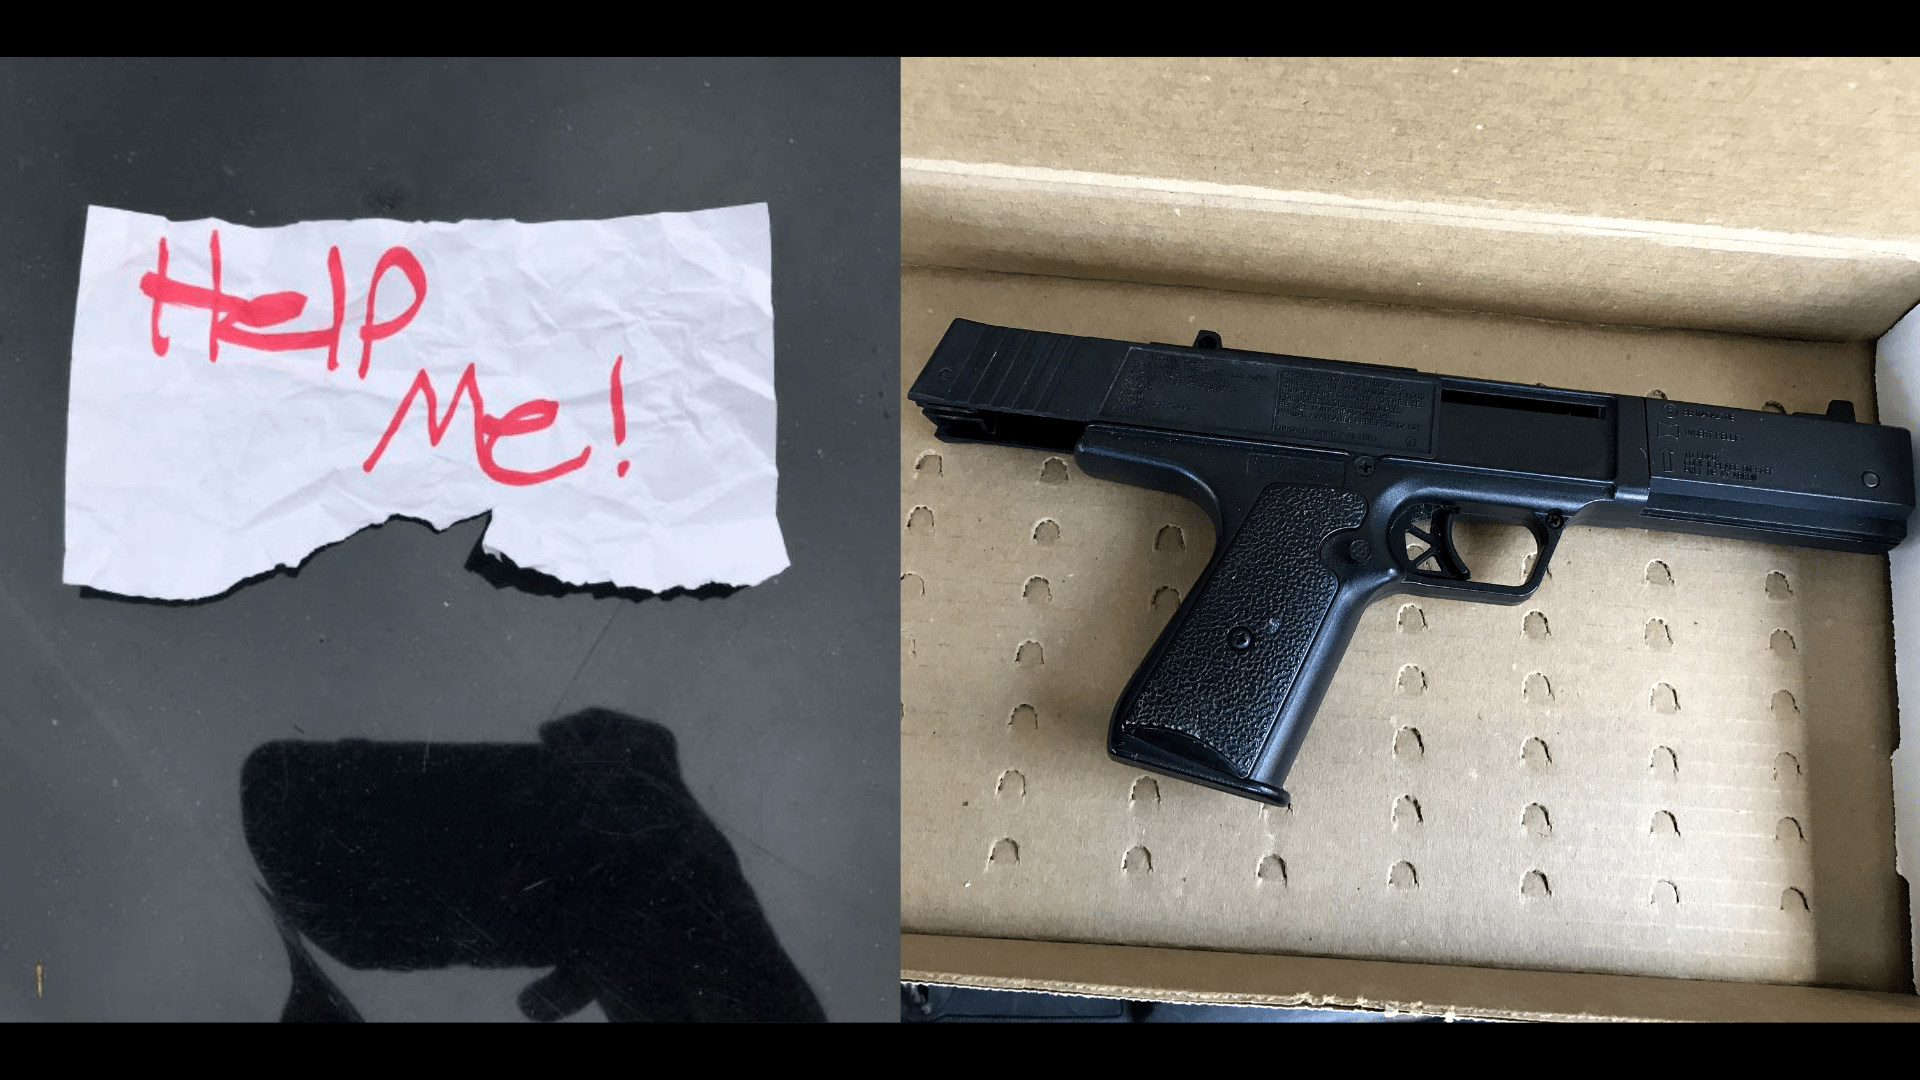 From left: The victim's "Help Me!" sign that led to her rescue; the handgun used by the suspect during the victim's abduction in July 2023. (U.S. Attorney's Office)